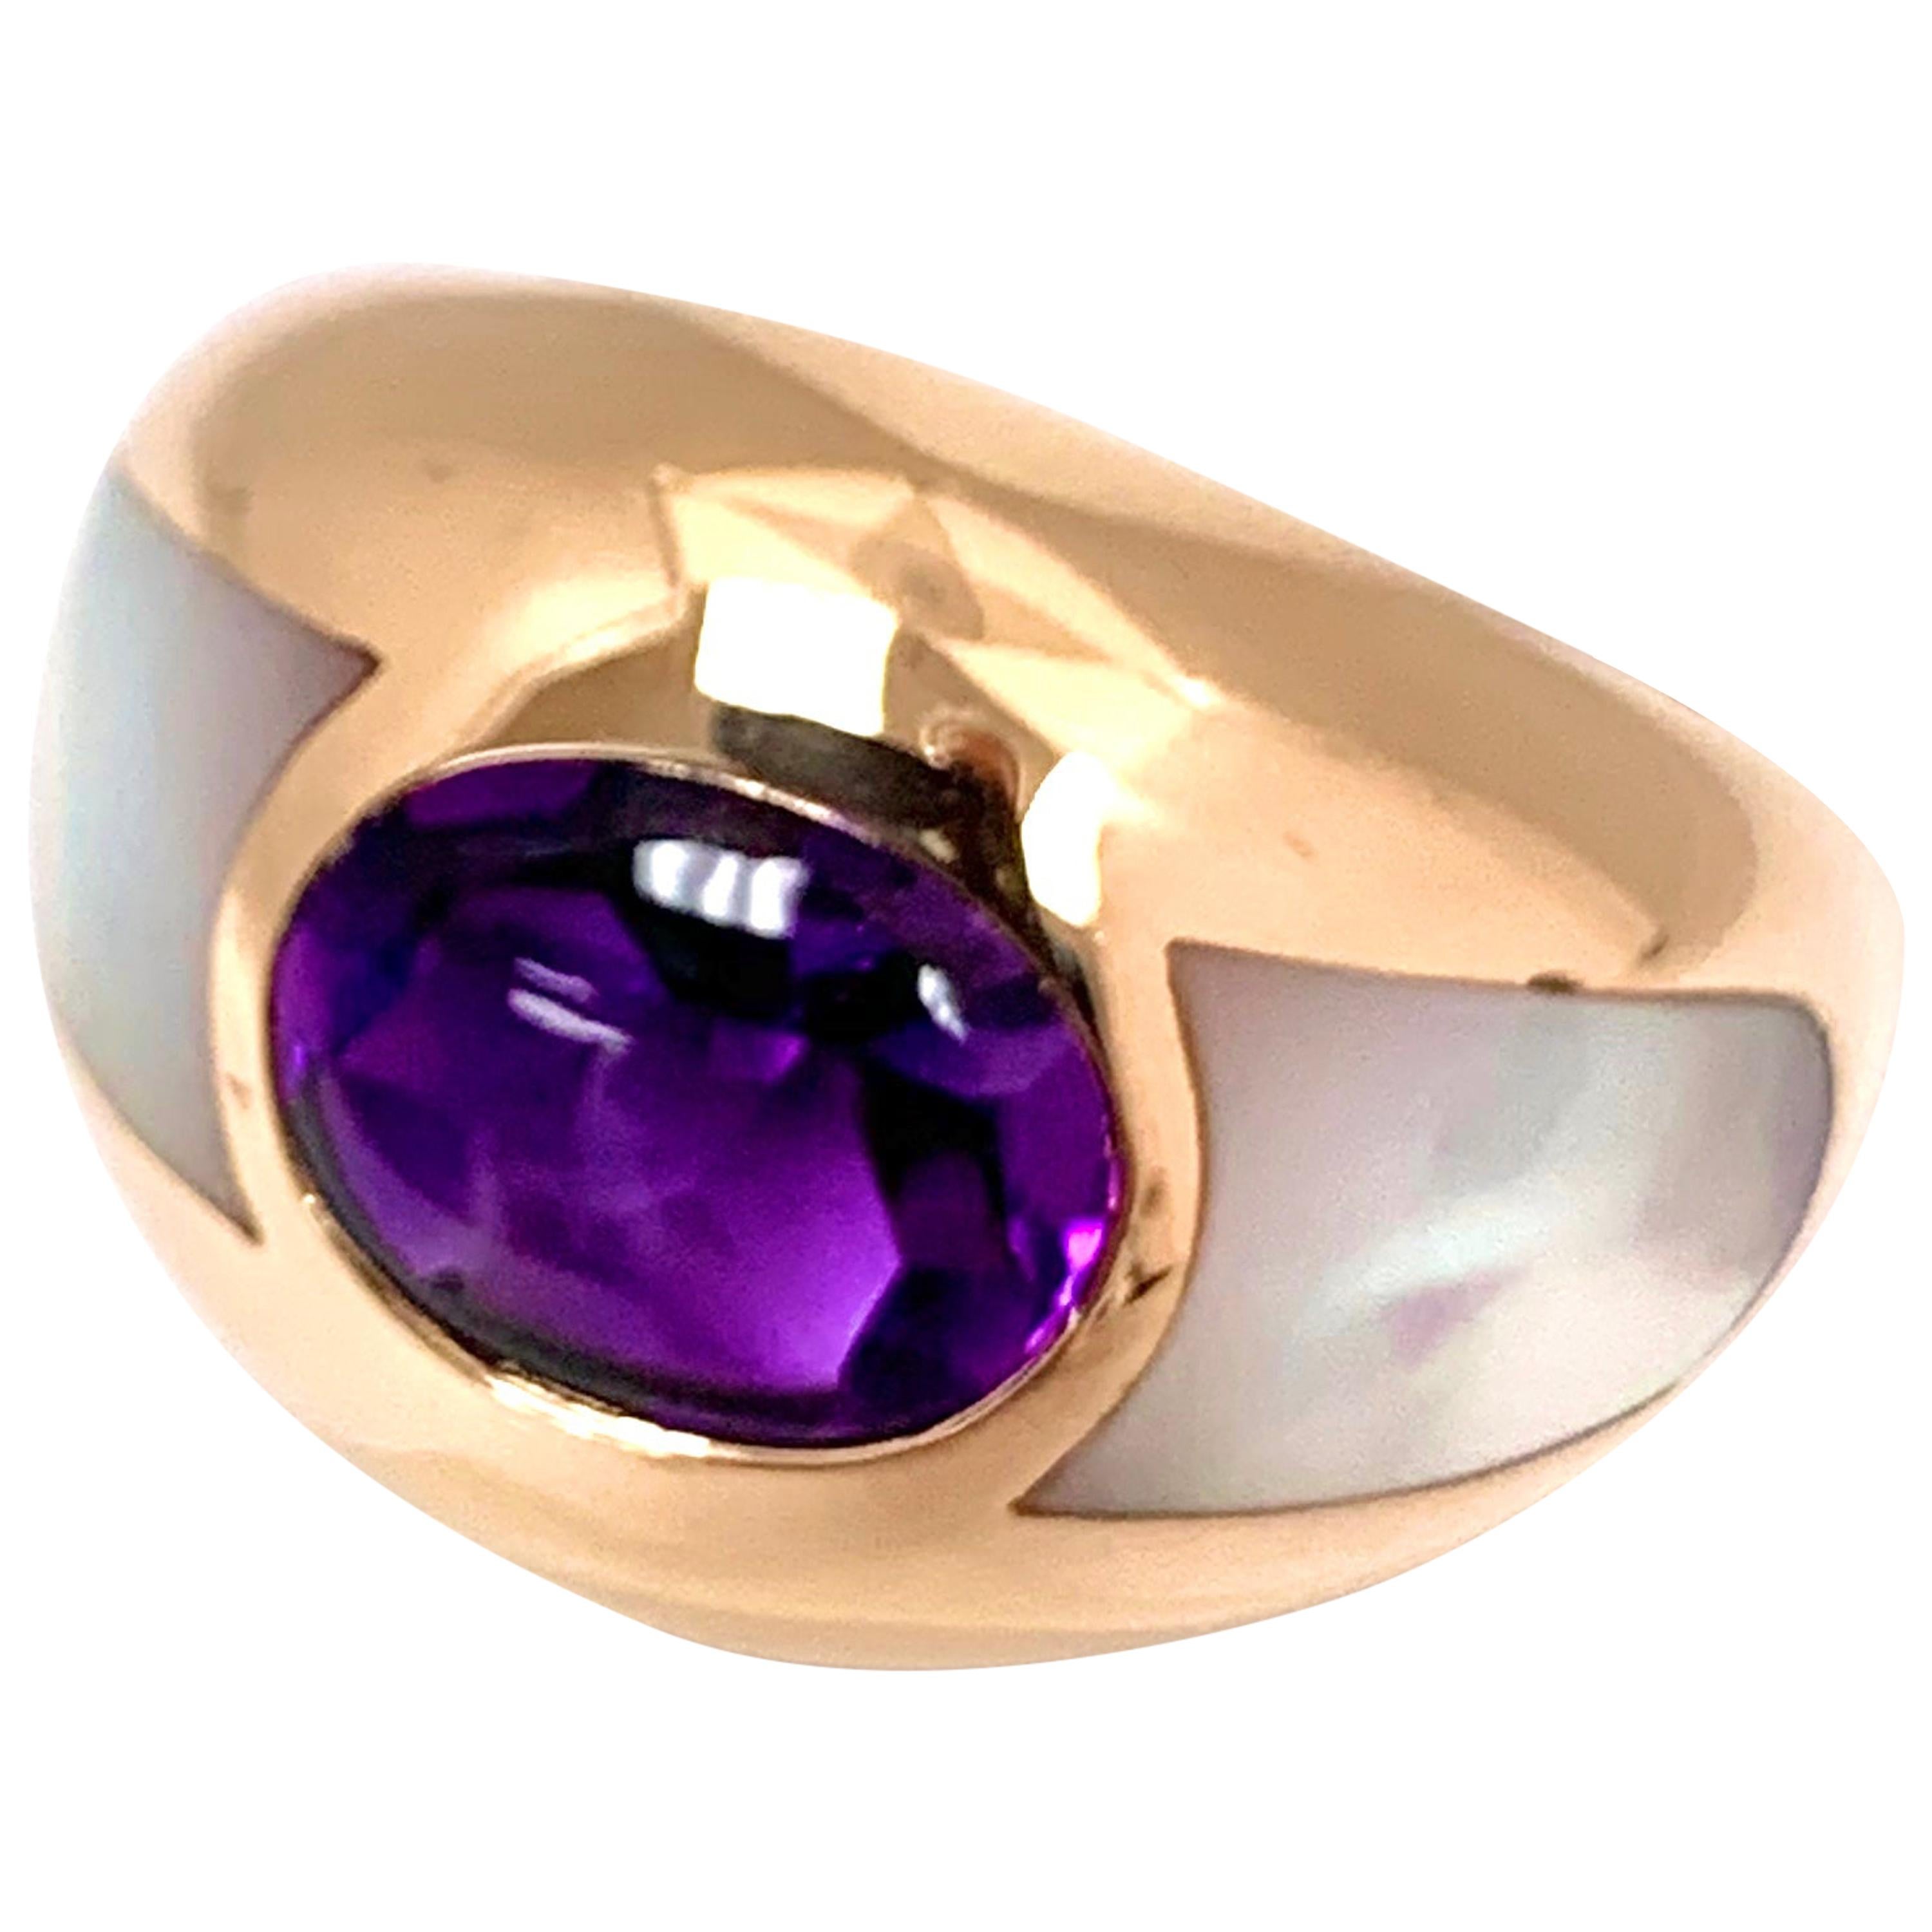 Mauboussin "Aloha" Amethyst and Mother of Pearl 18K Yellow Gold Ring